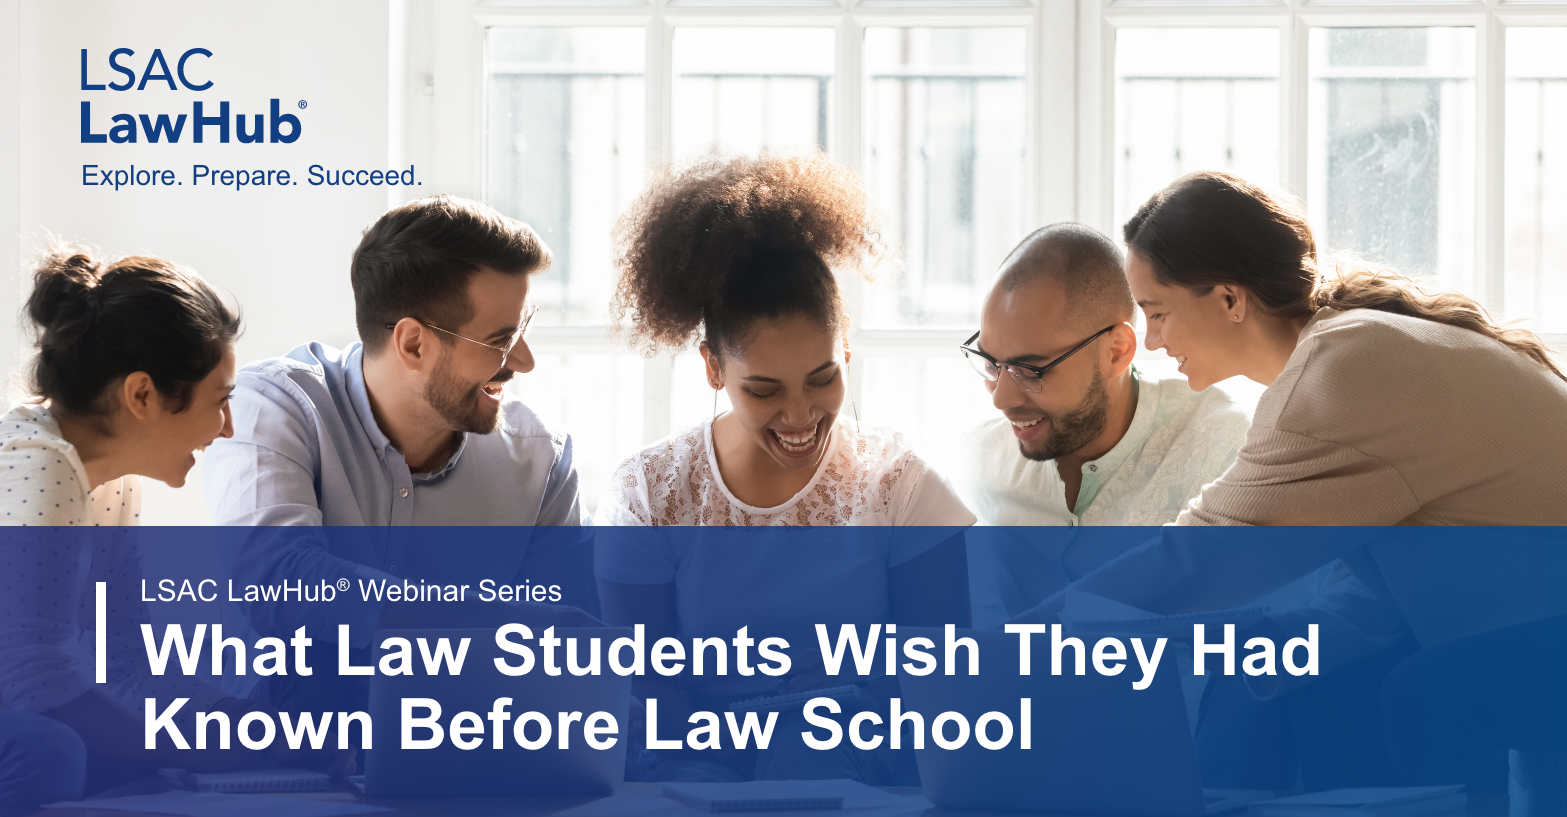 LSAC LawHub Webinar Series - What Law Students Wish They Had Known Before Law School